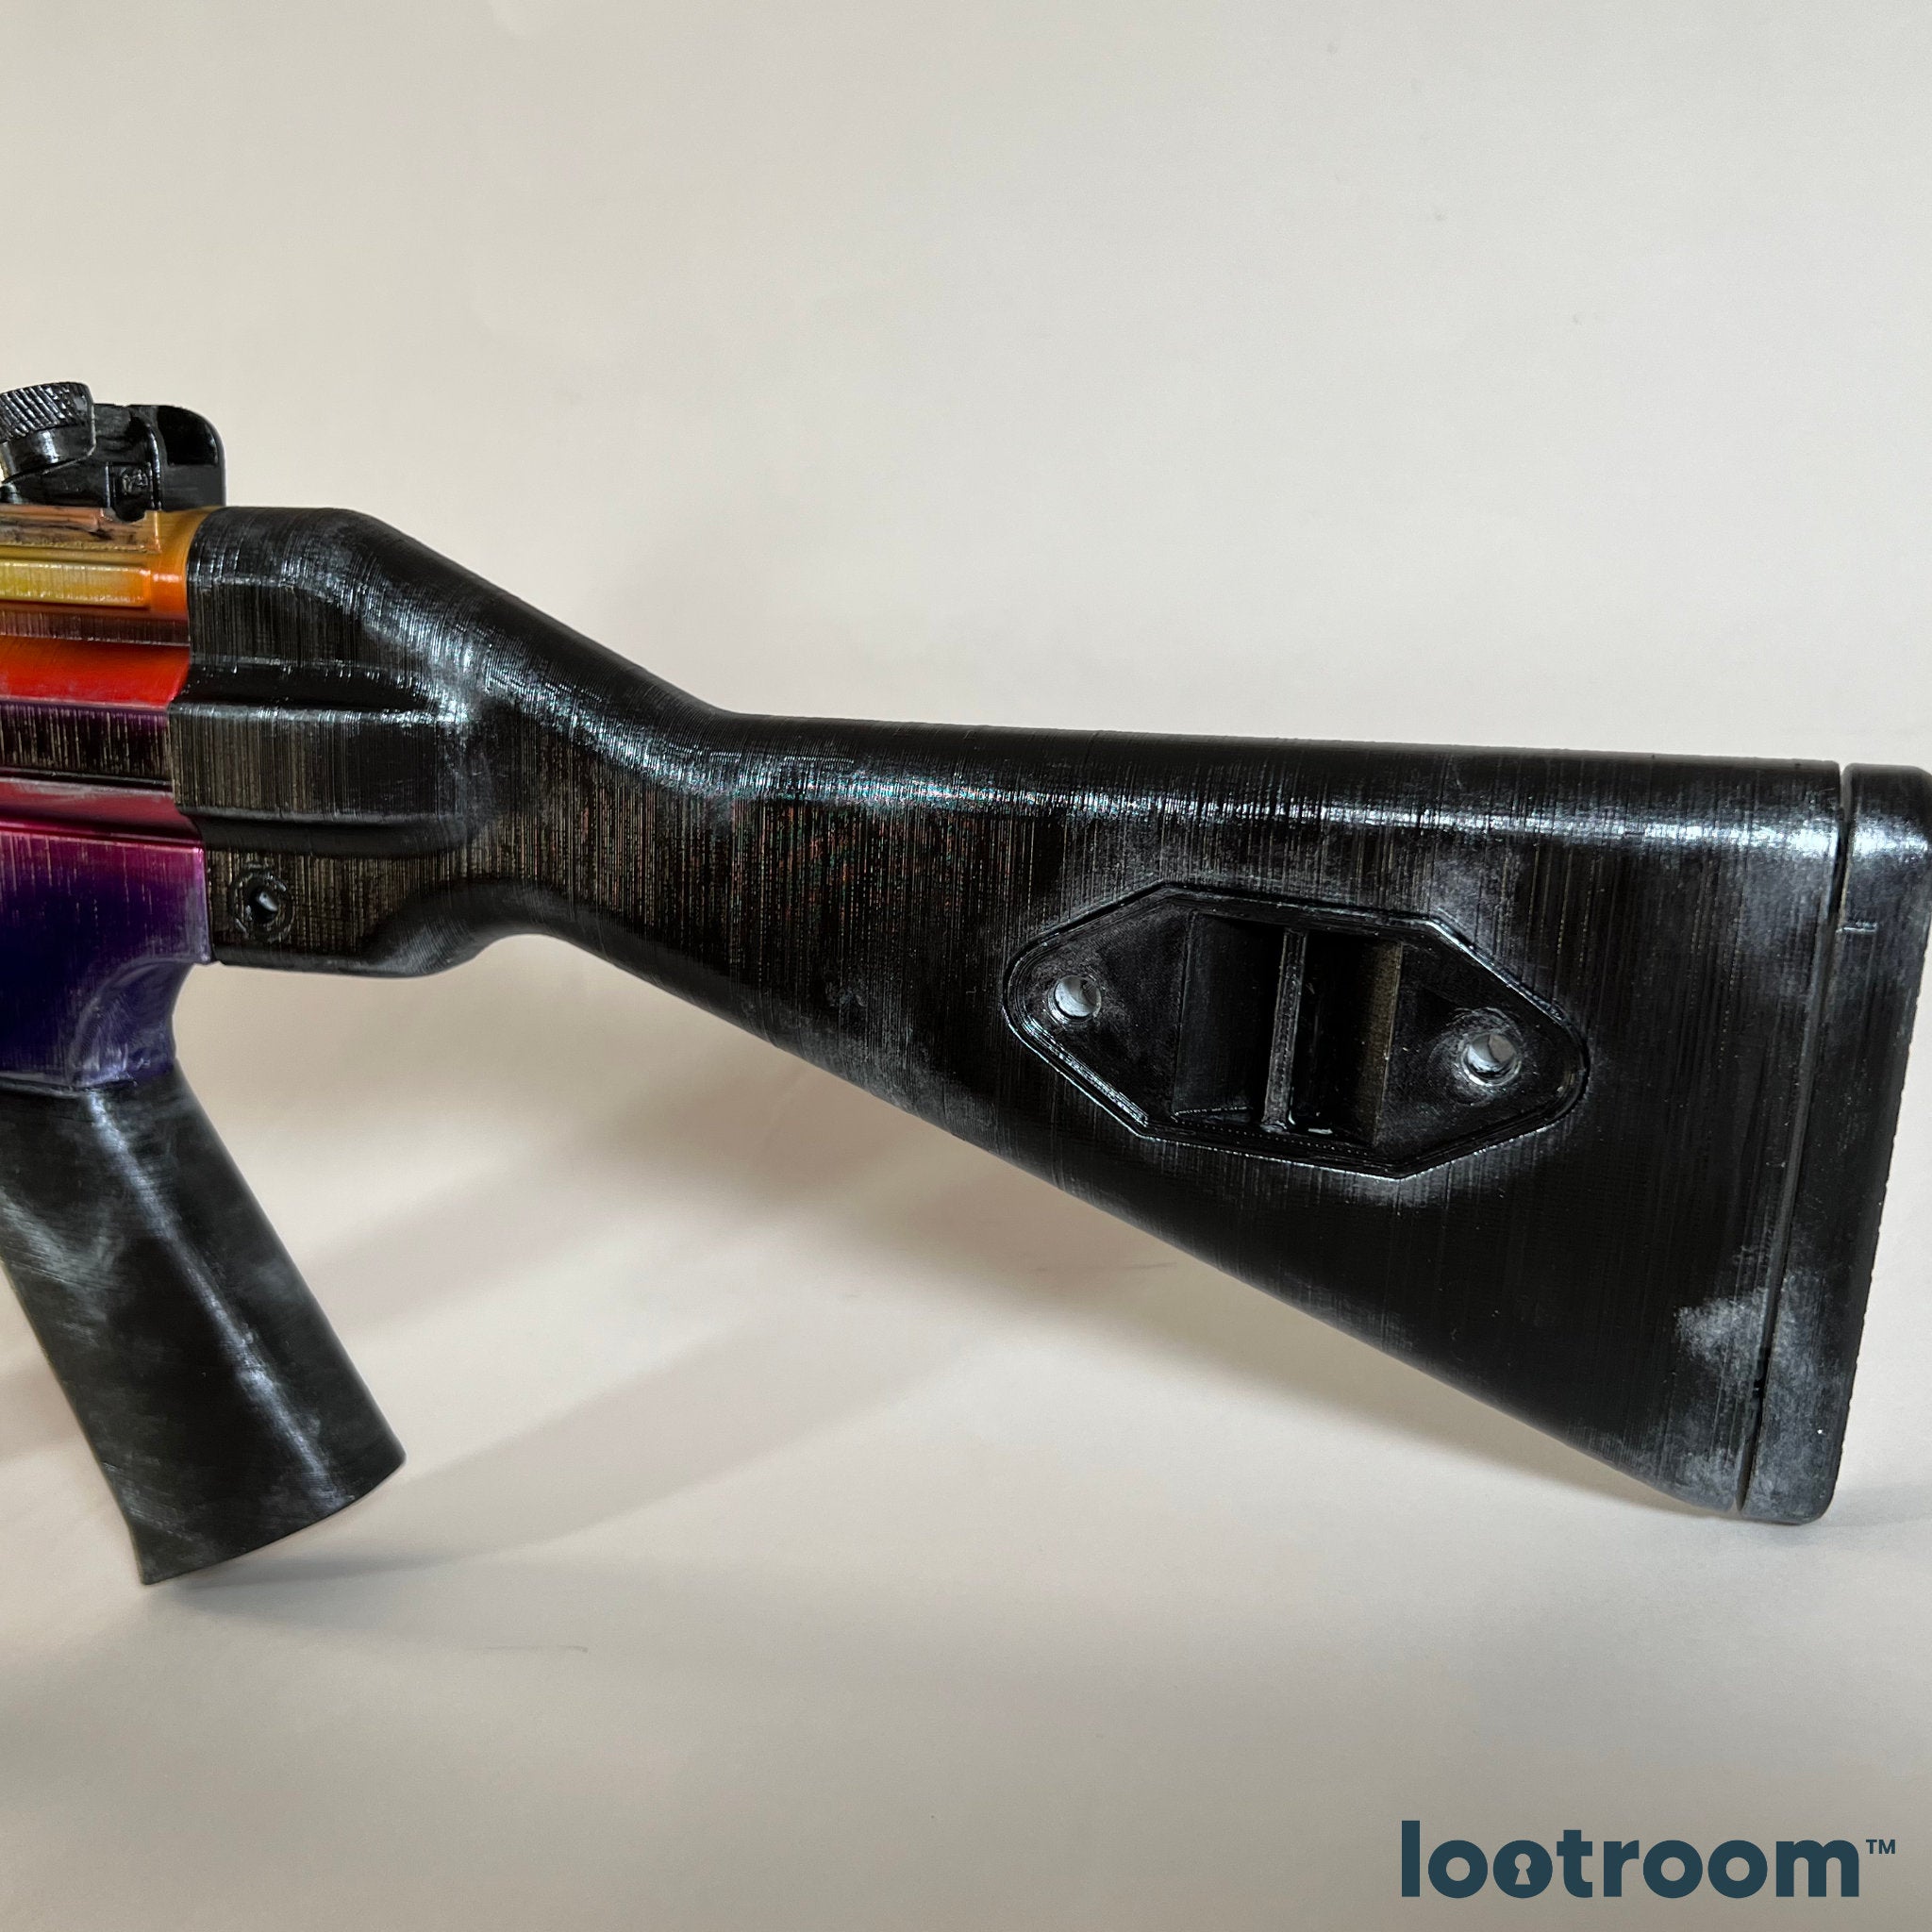 rust lifesize MP5 tempered skin prop cosplay